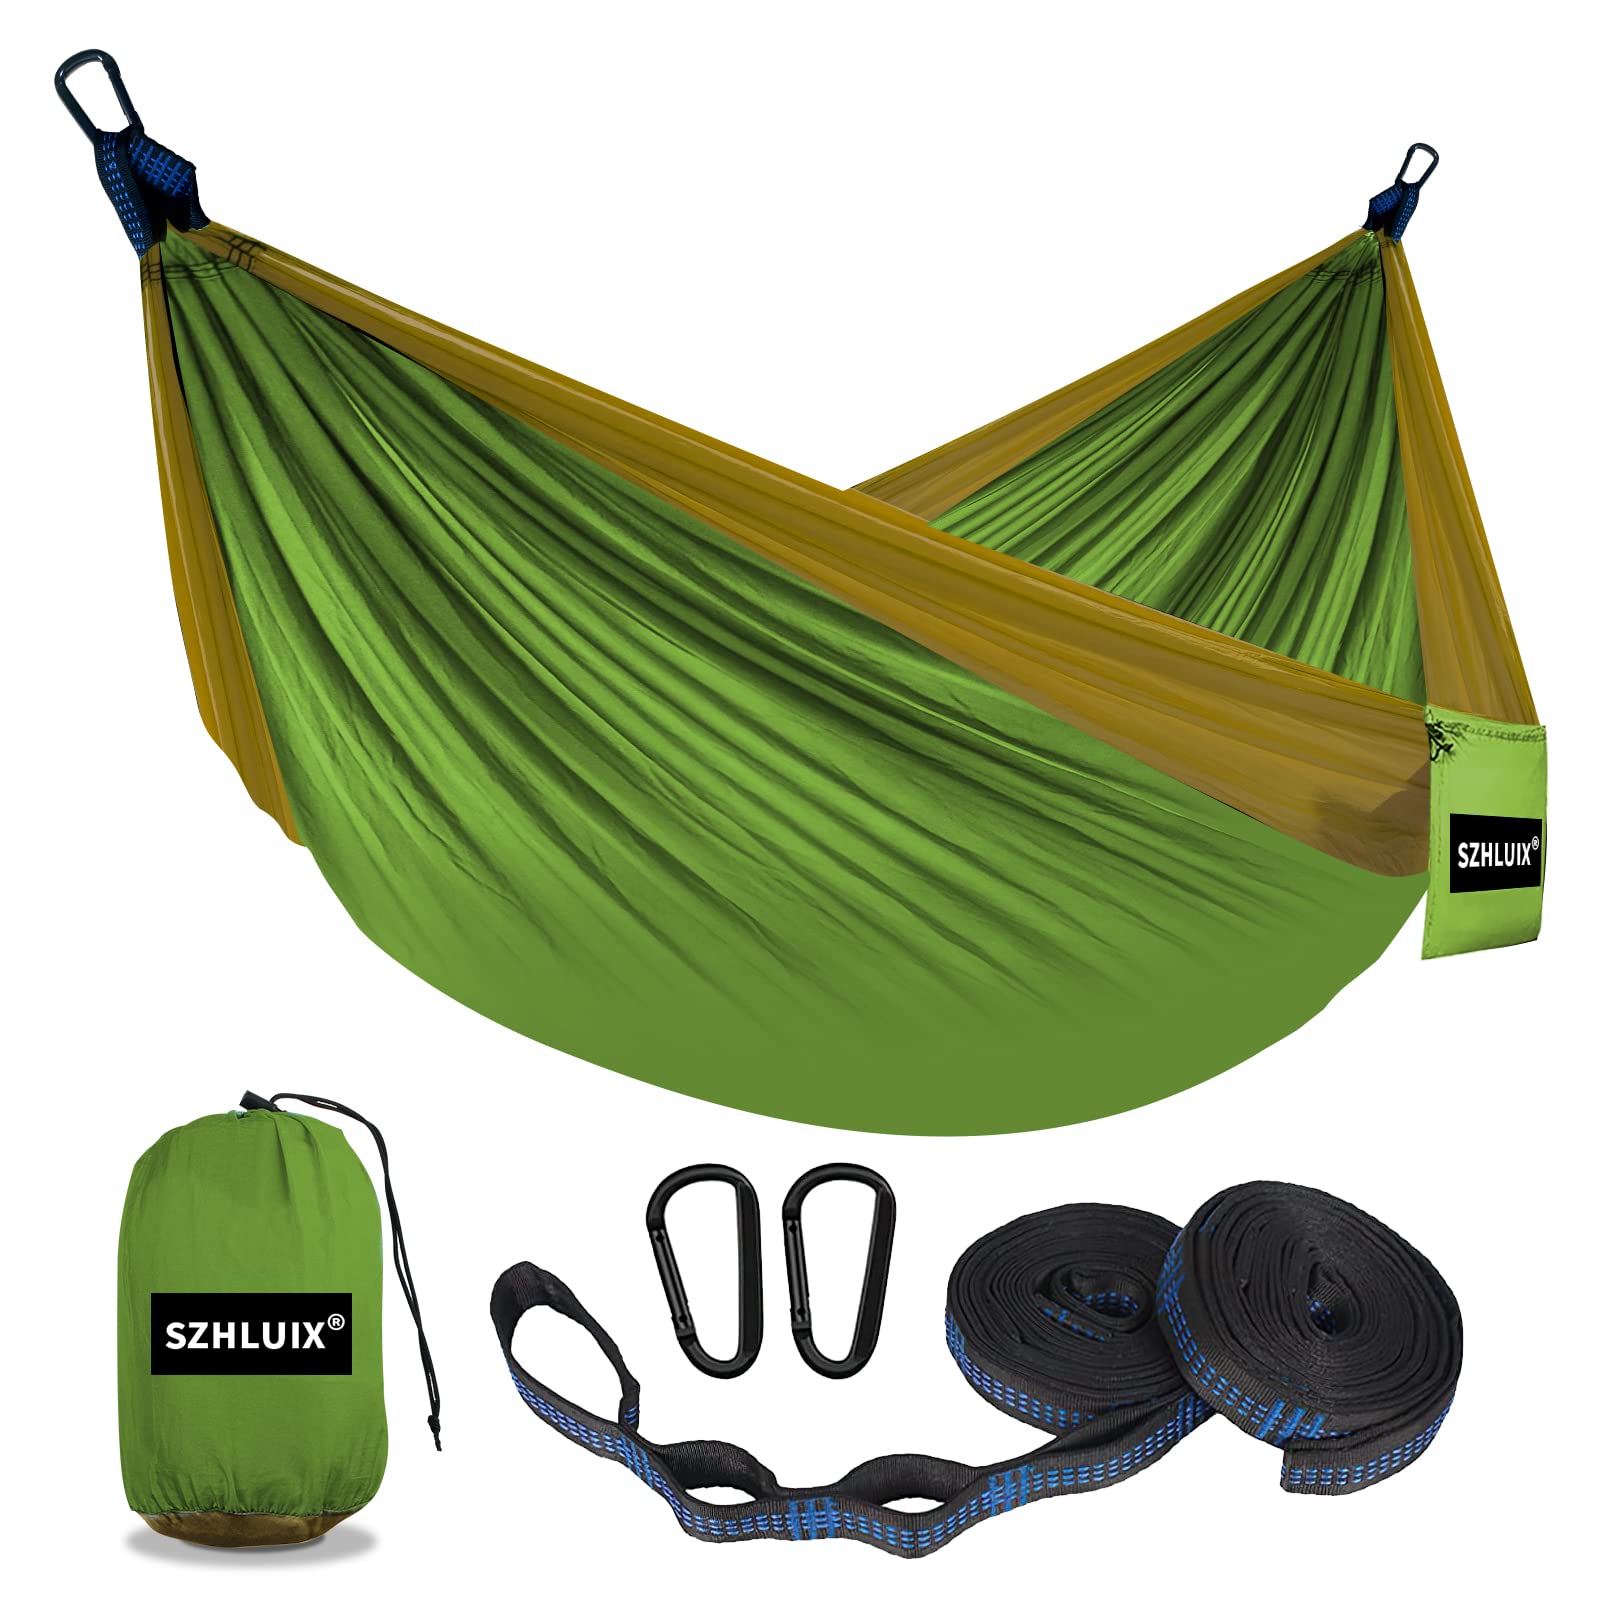 SZHLUX camping Hammock Double & Single Portable Hammocks with 2 Tree Straps, great for Hiking,Backpacking,Hunting,Outdoor,Beach,